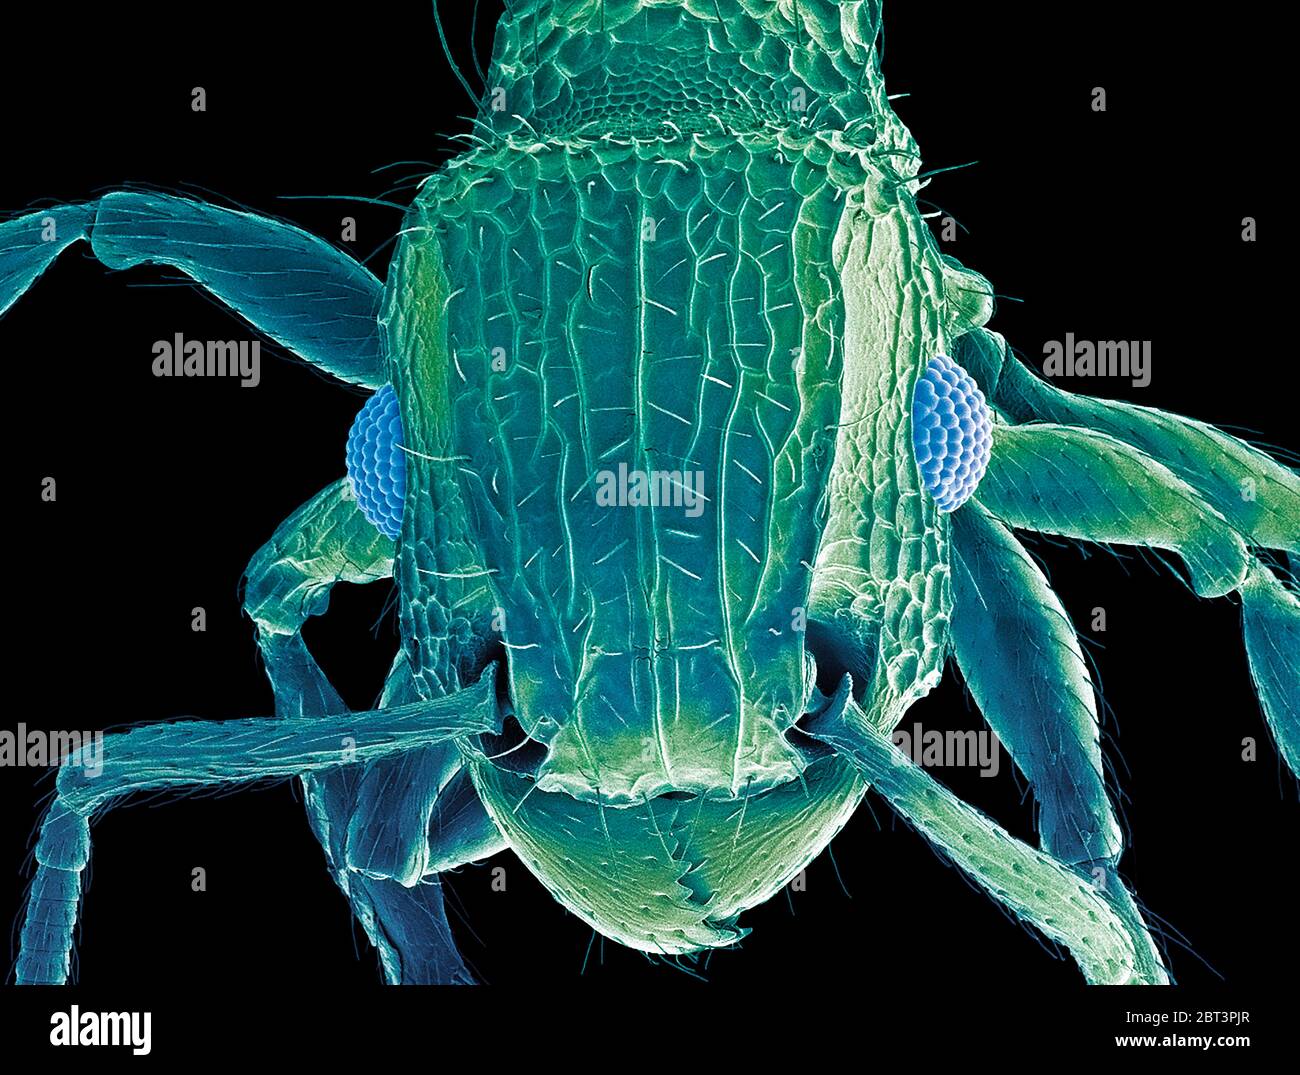 Ant head. Coloured scanning electron micrograph (SEM) of the head of an ant (family Formicidae). showing its large compound eyes (blue) and jaws. Magnification: x50 when printed 10 centimetres wide. Stock Photo